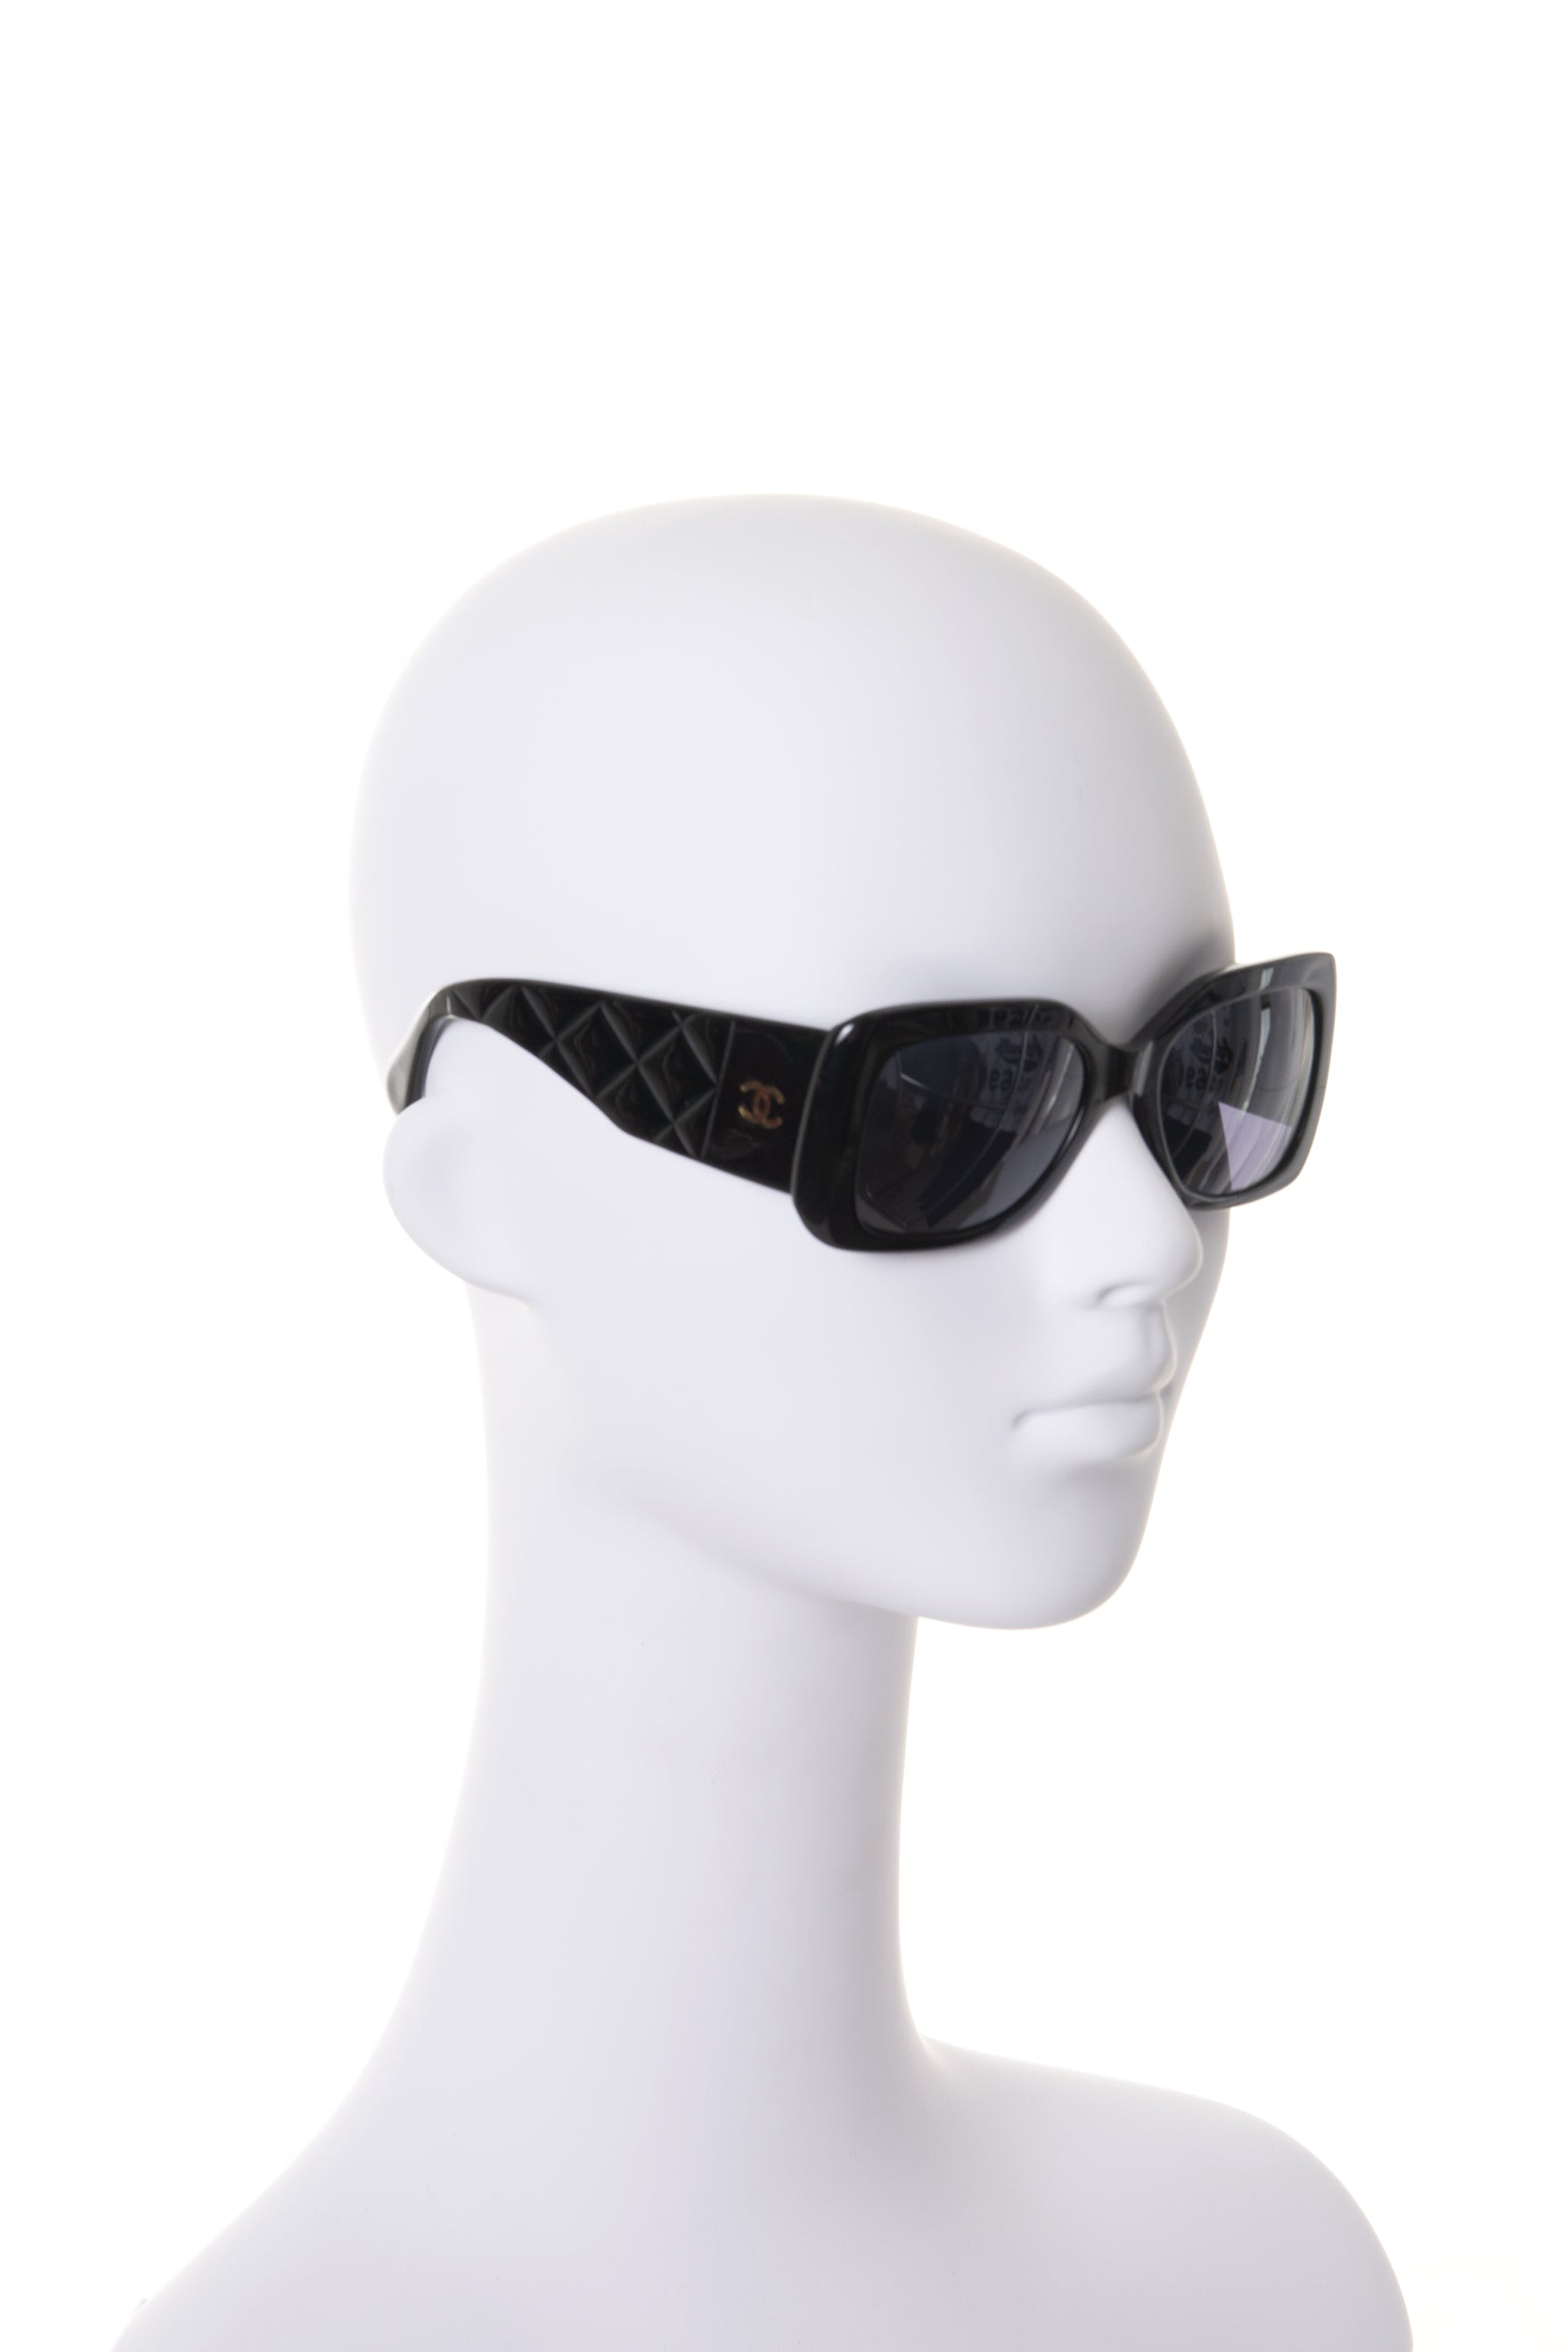 CHANEL 5426 c.501/S6 Acetate Quilted CC Sunglasses 